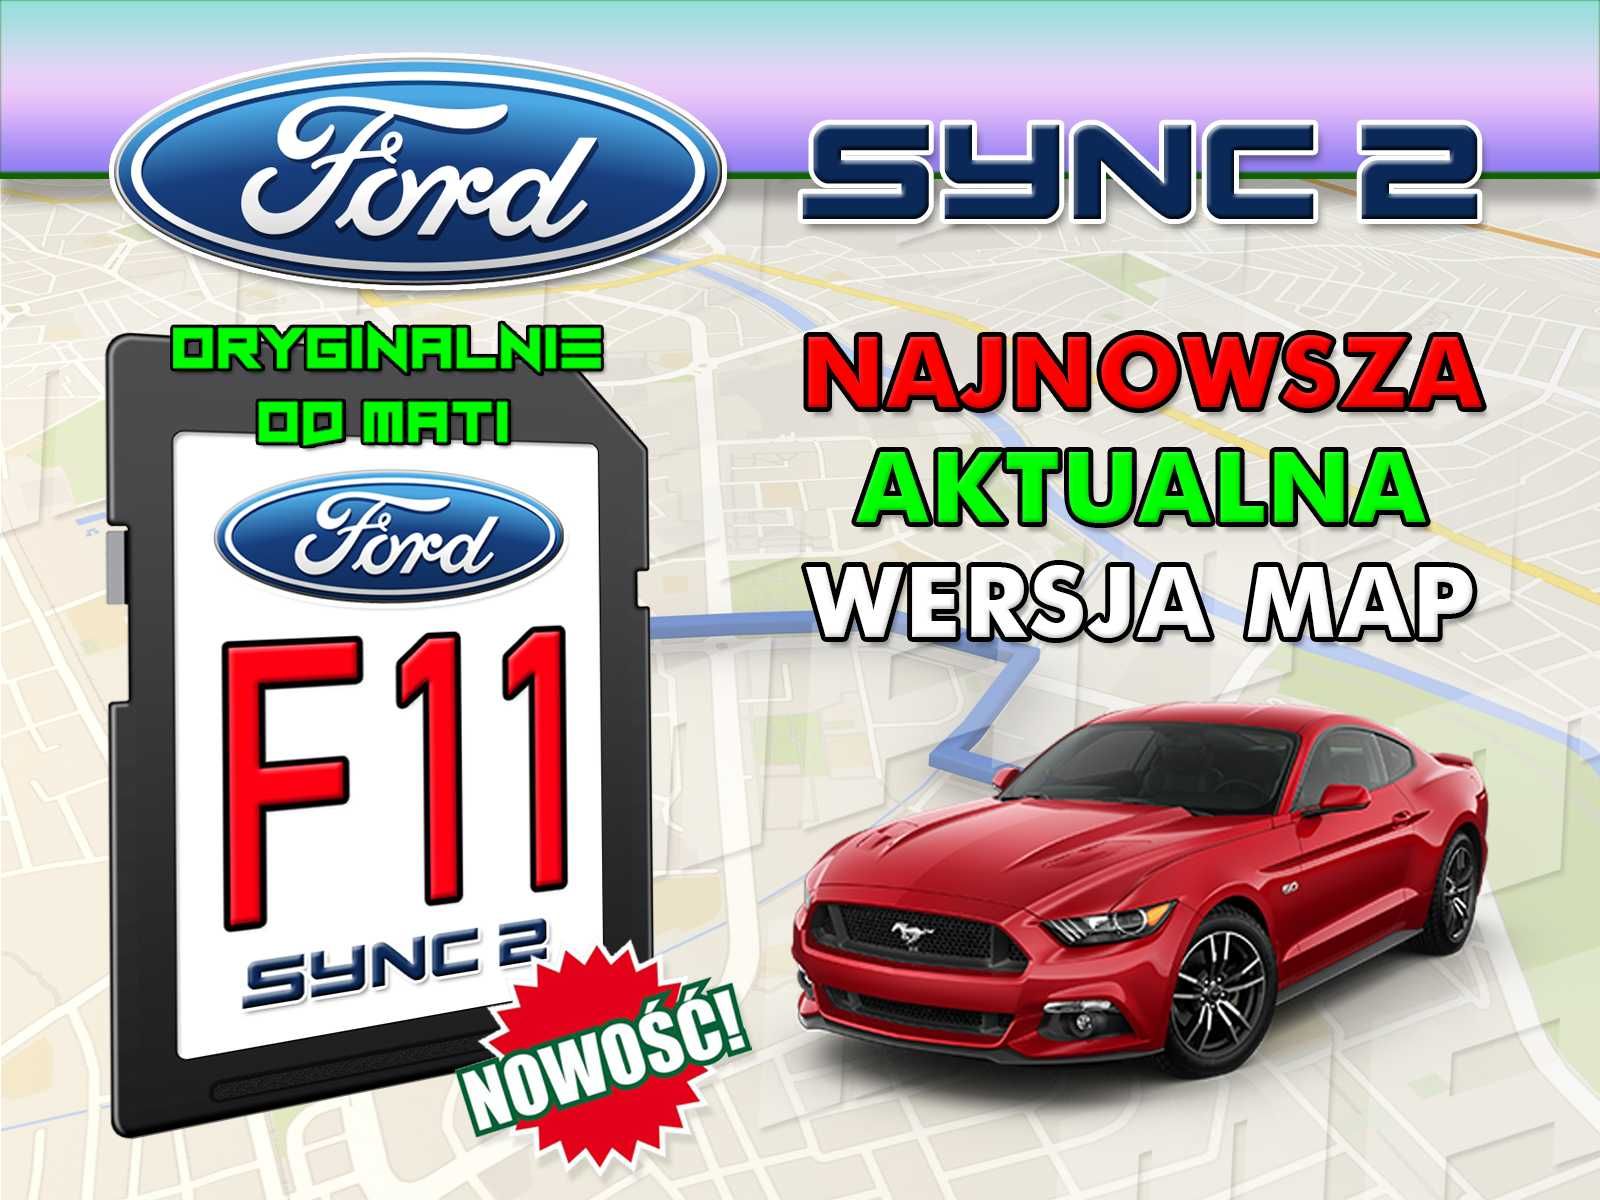 Mapy karta pamięci do Ford Sync II 2 - Mondeo, C-Max, Mustang, itp